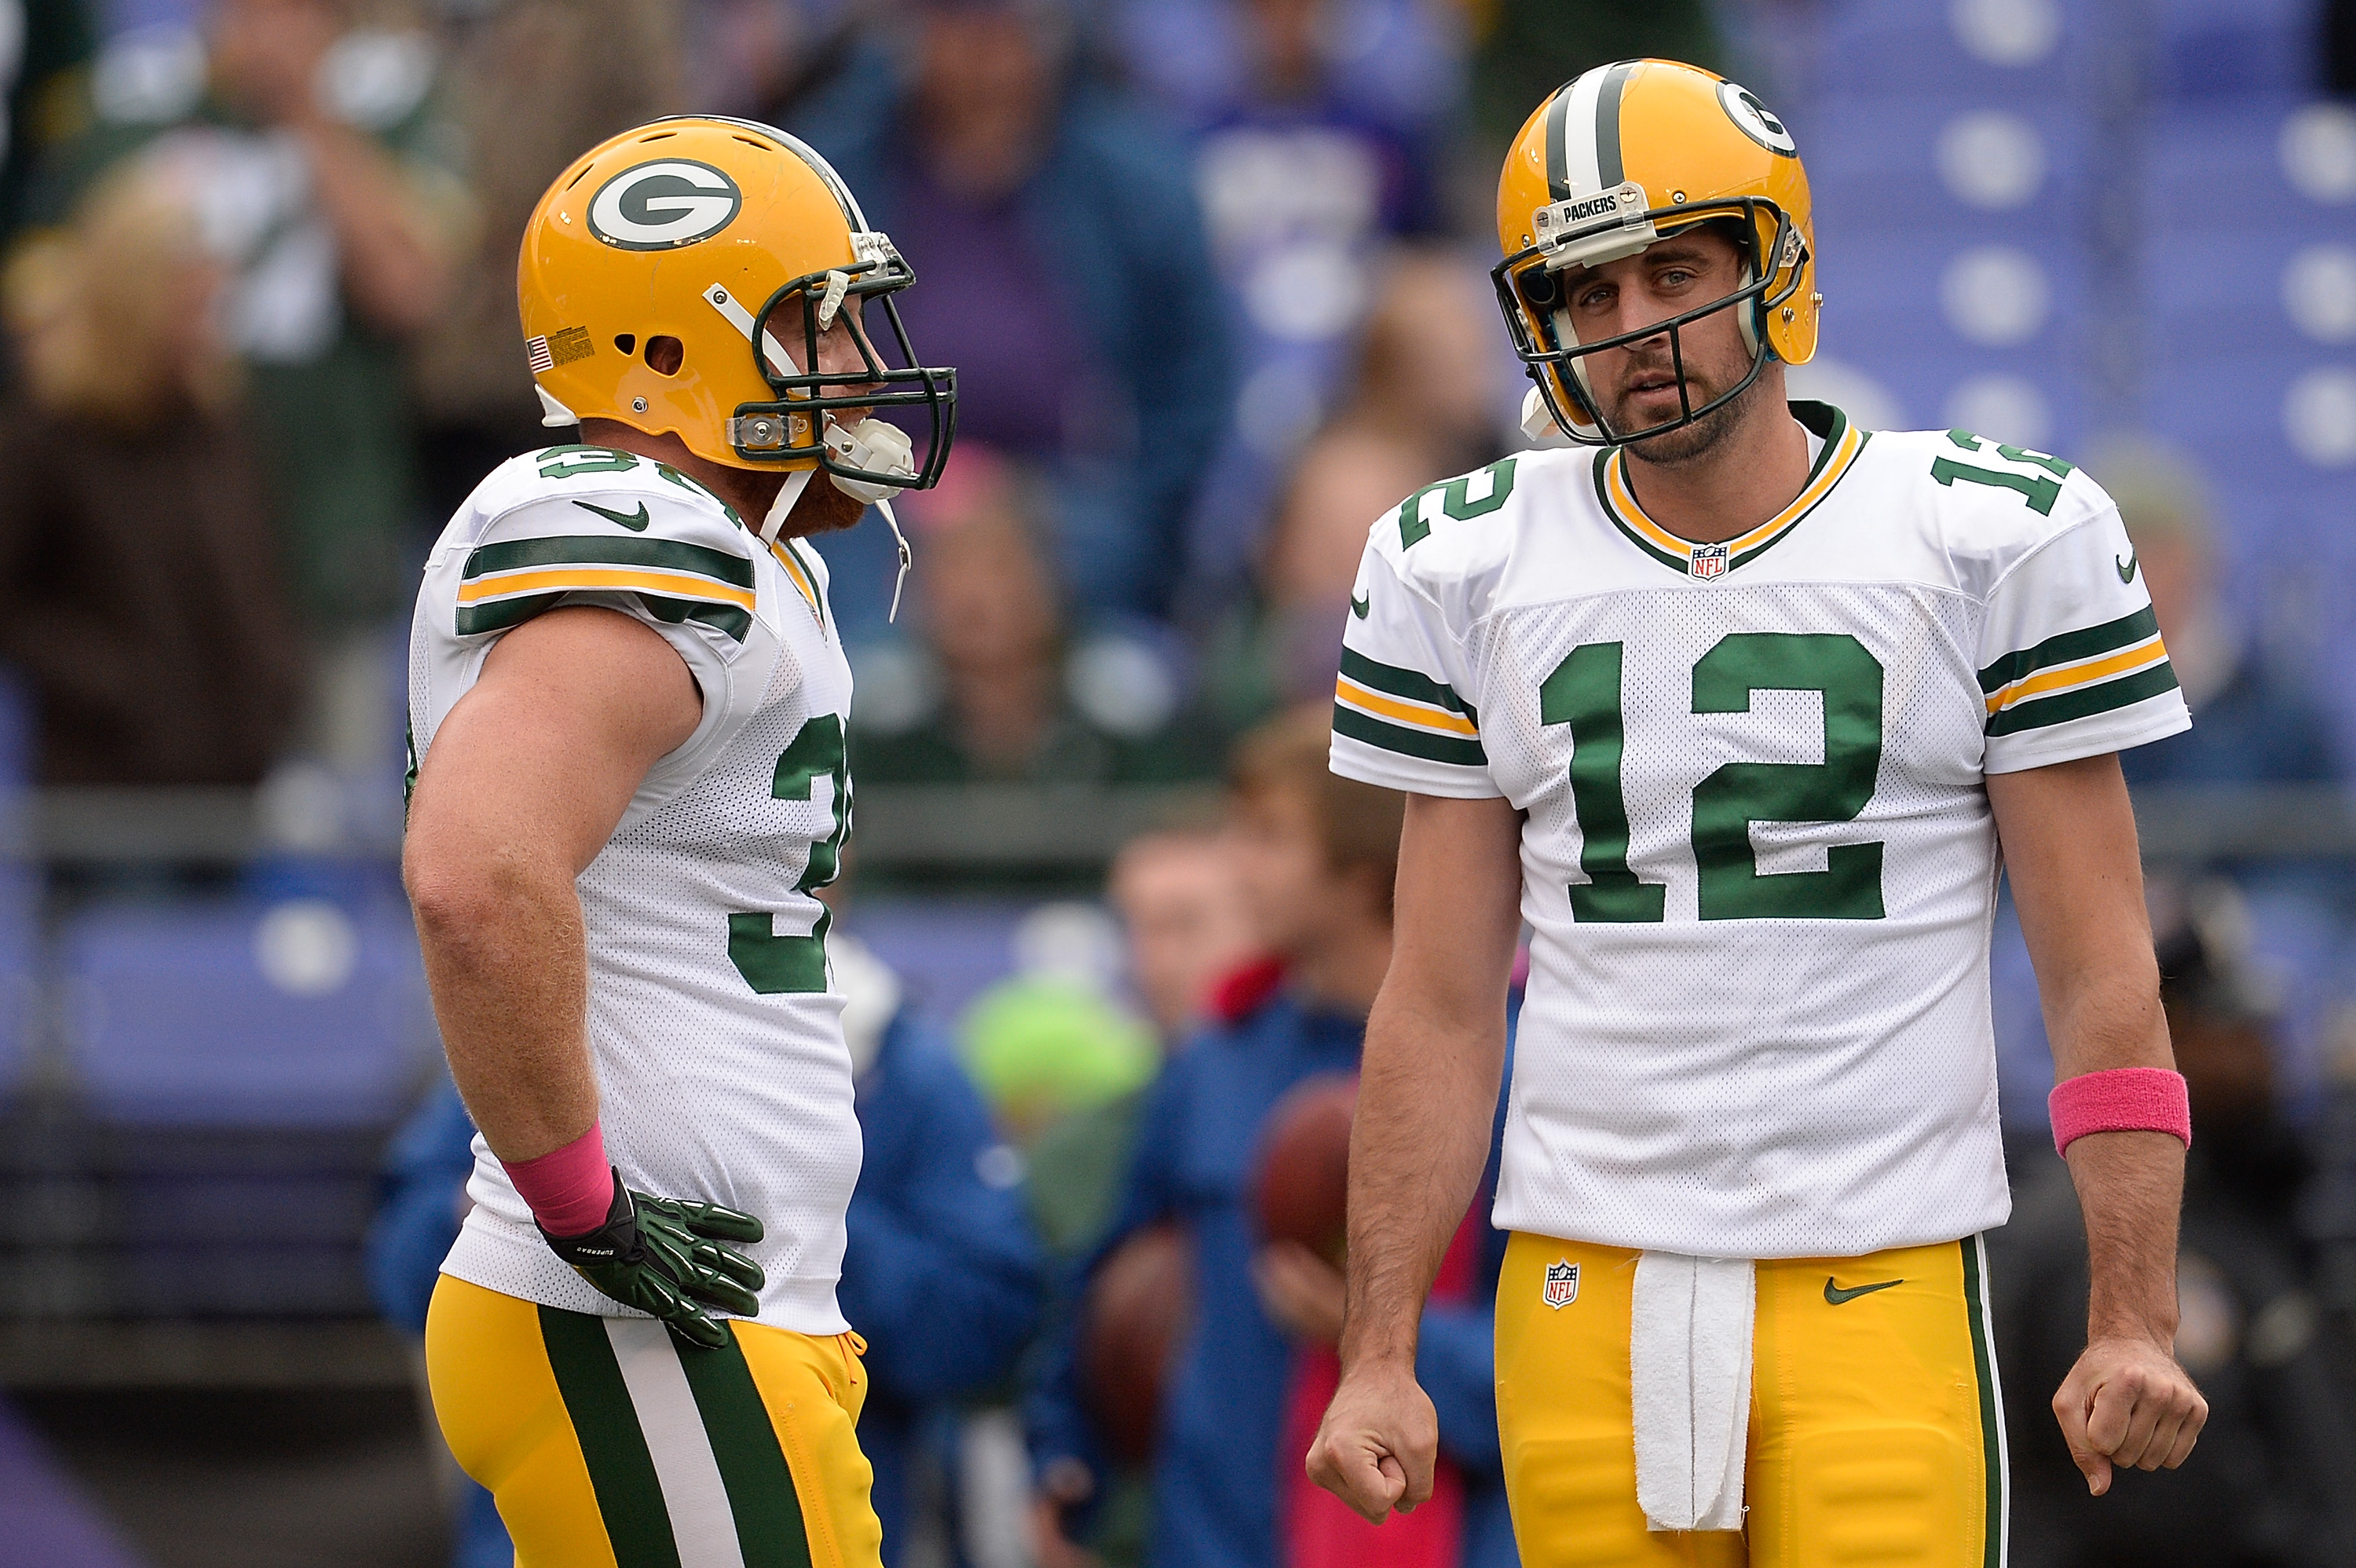 There might be some hope for Packers fans regarding Aaron Rodgers, according to John Kuhn